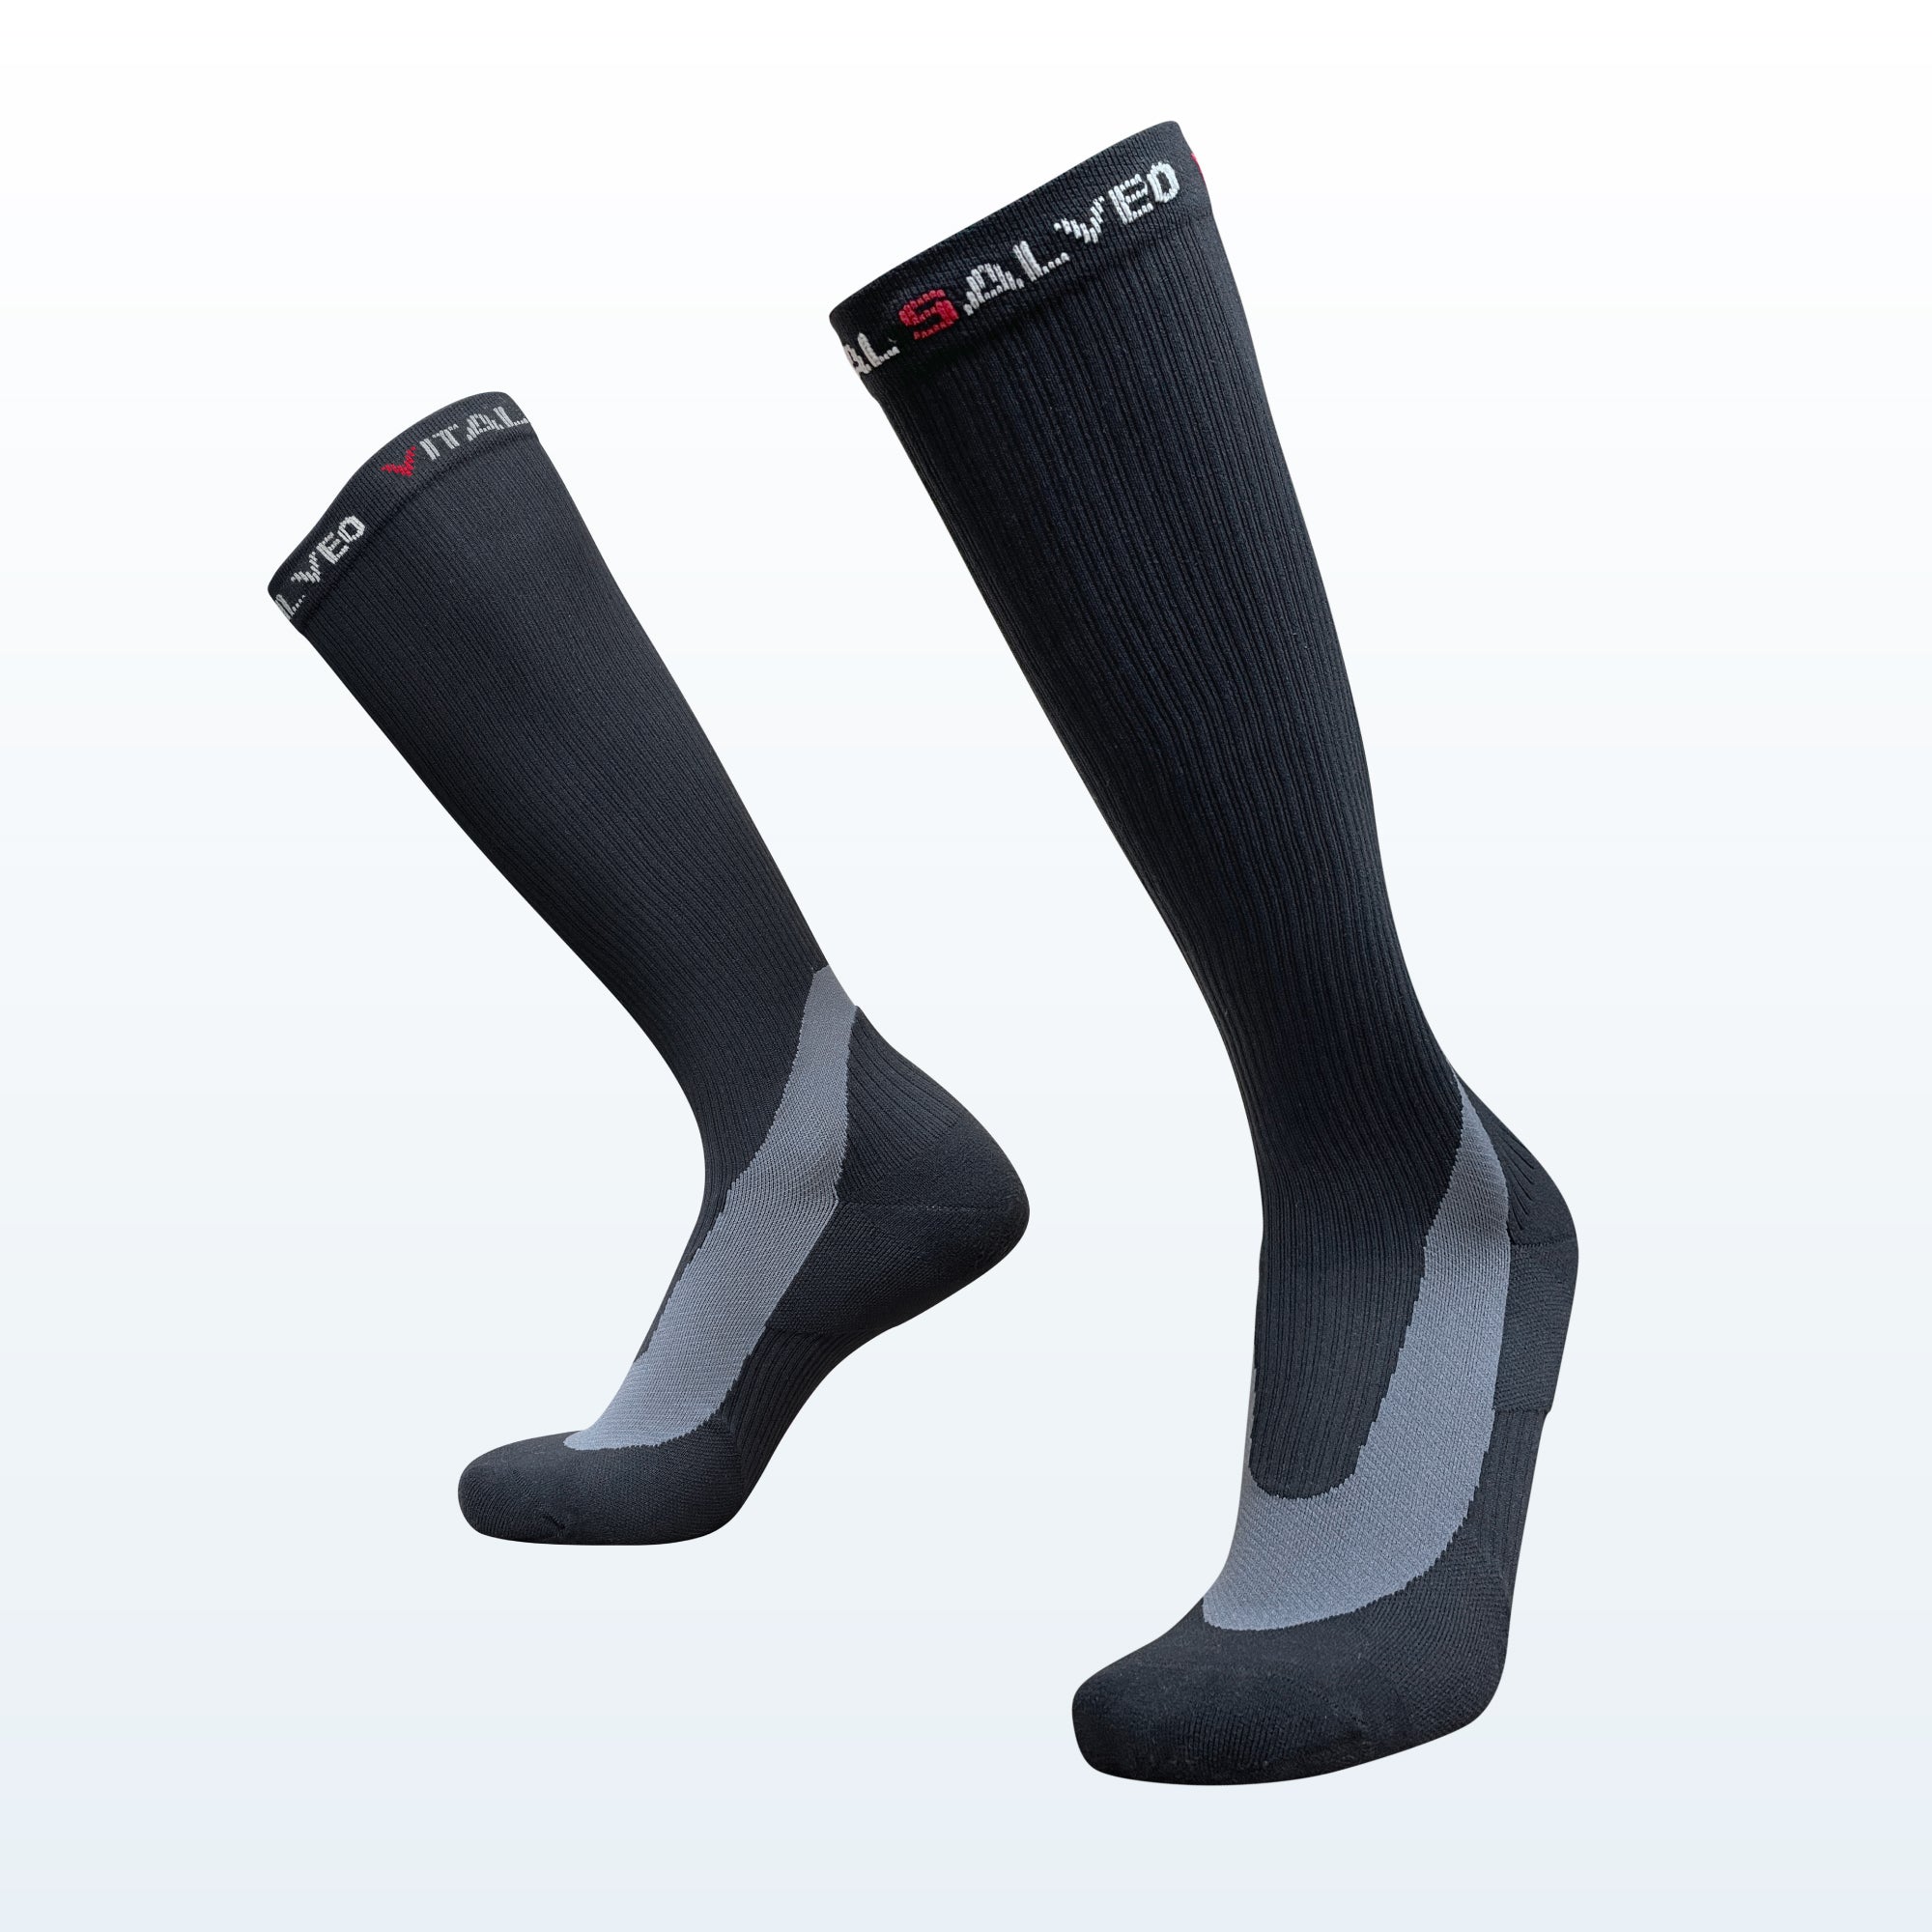 Arch Support Performance Compression Calf Socks